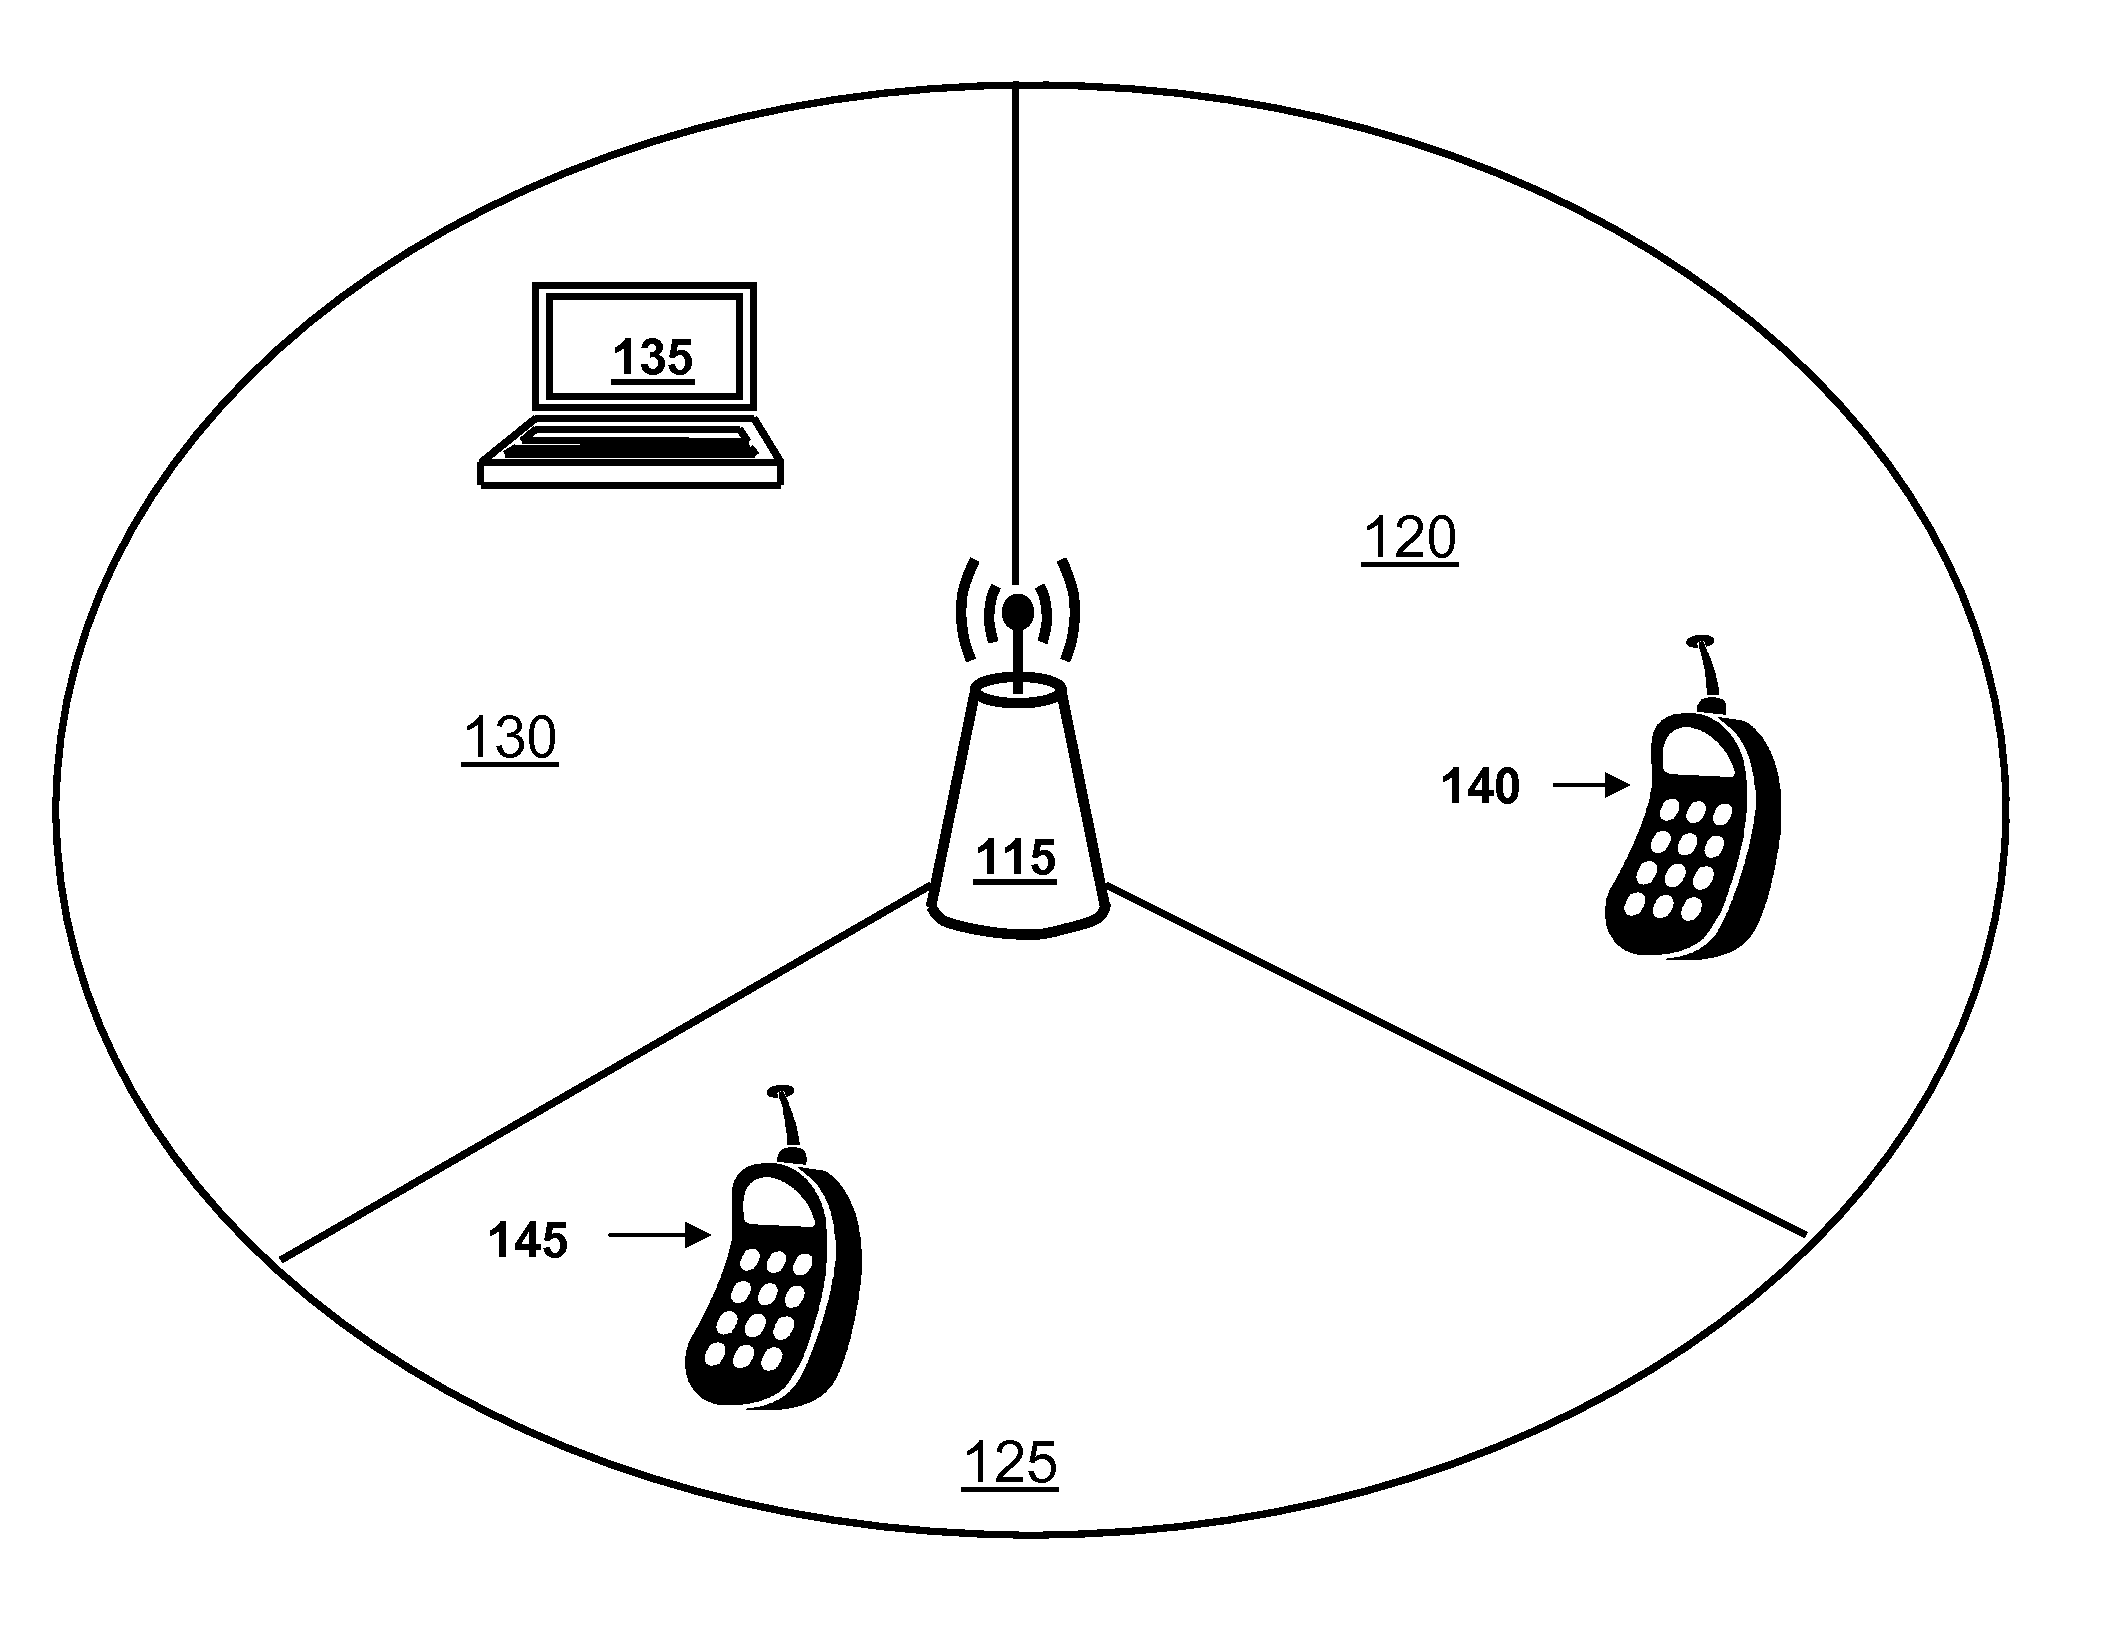 Apparatus and method for dynamic resolution of secondary communication system resources